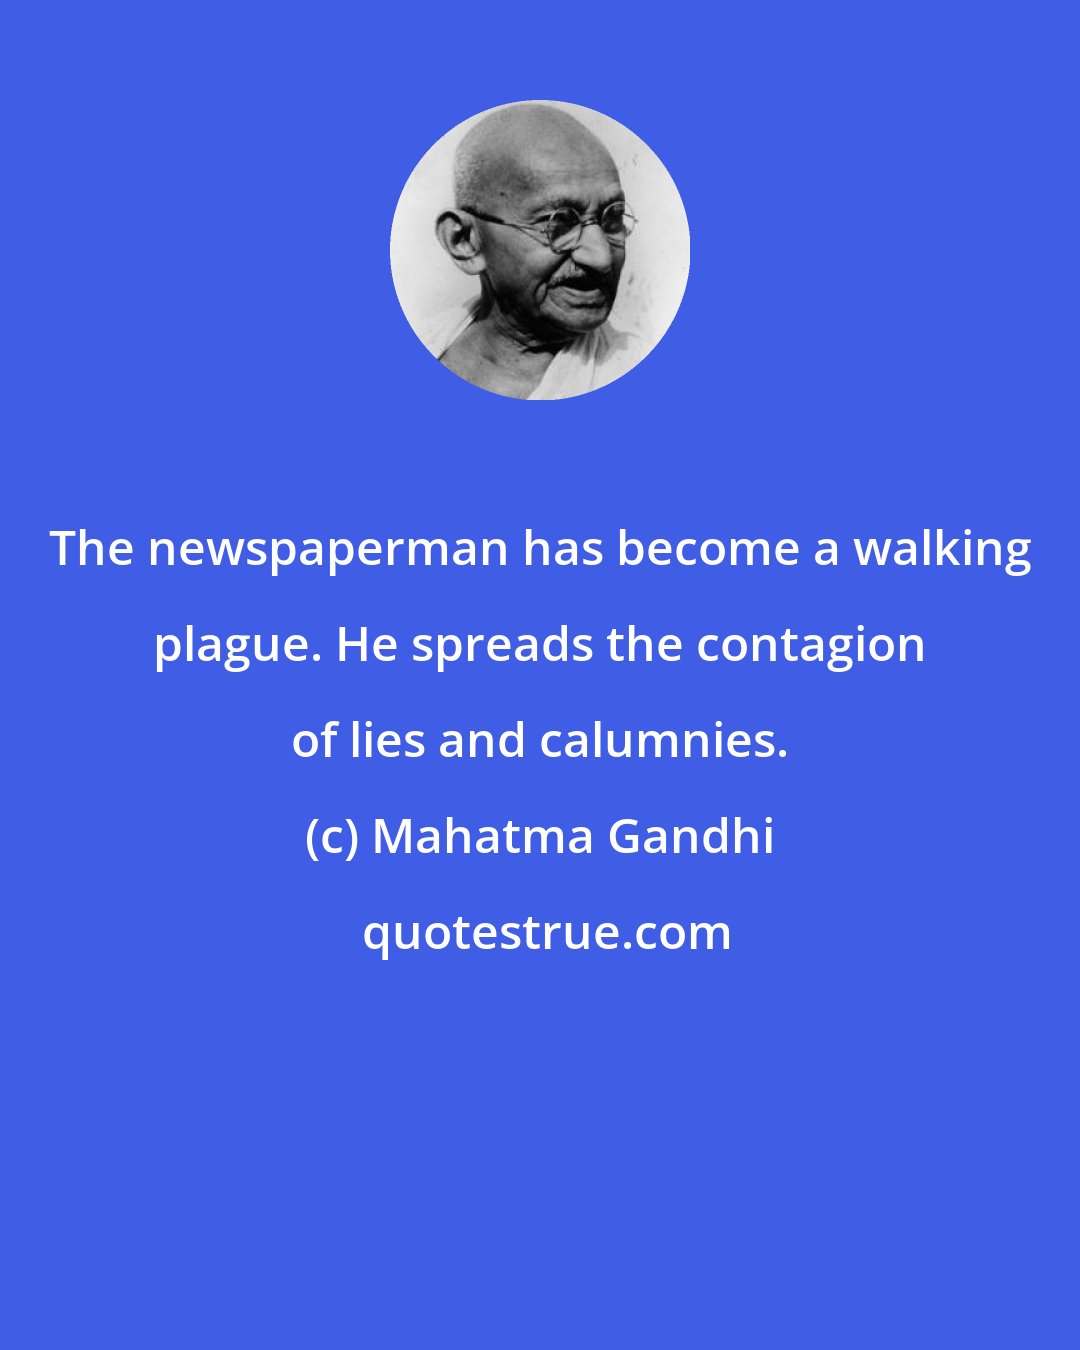 Mahatma Gandhi: The newspaperman has become a walking plague. He spreads the contagion of lies and calumnies.